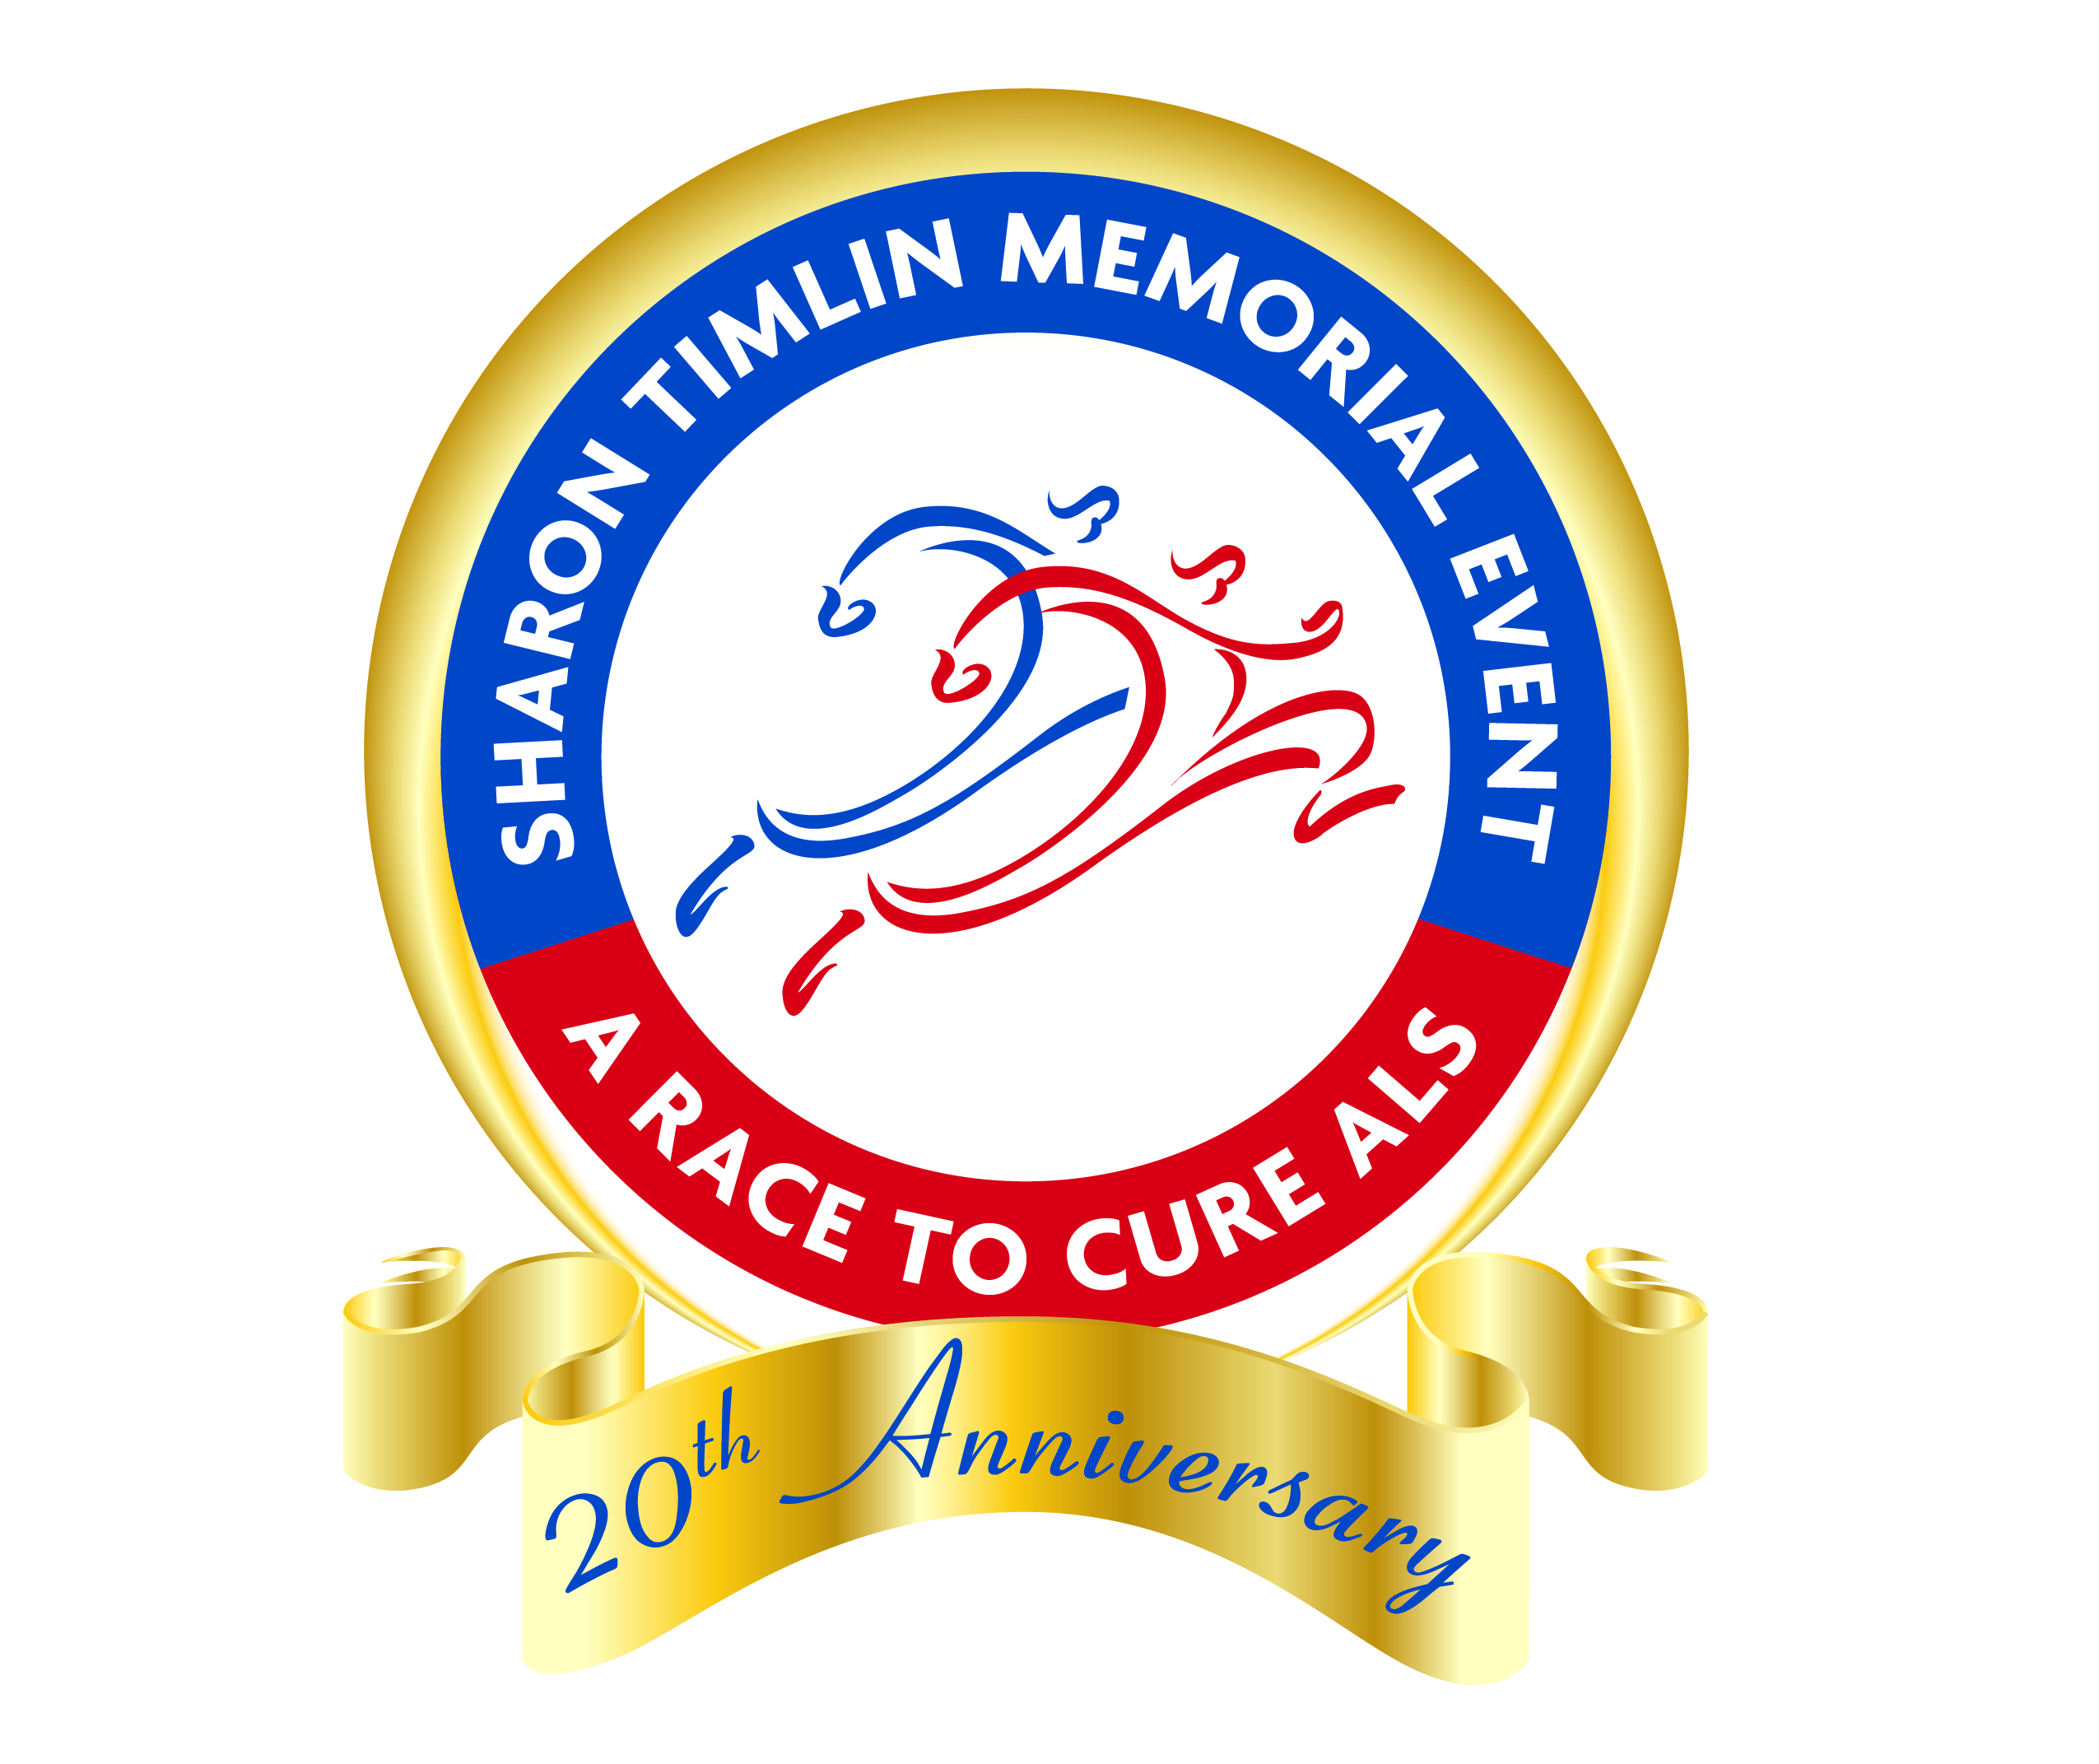 Sharon Timlin Memorial Event - A Race to Cure ALS